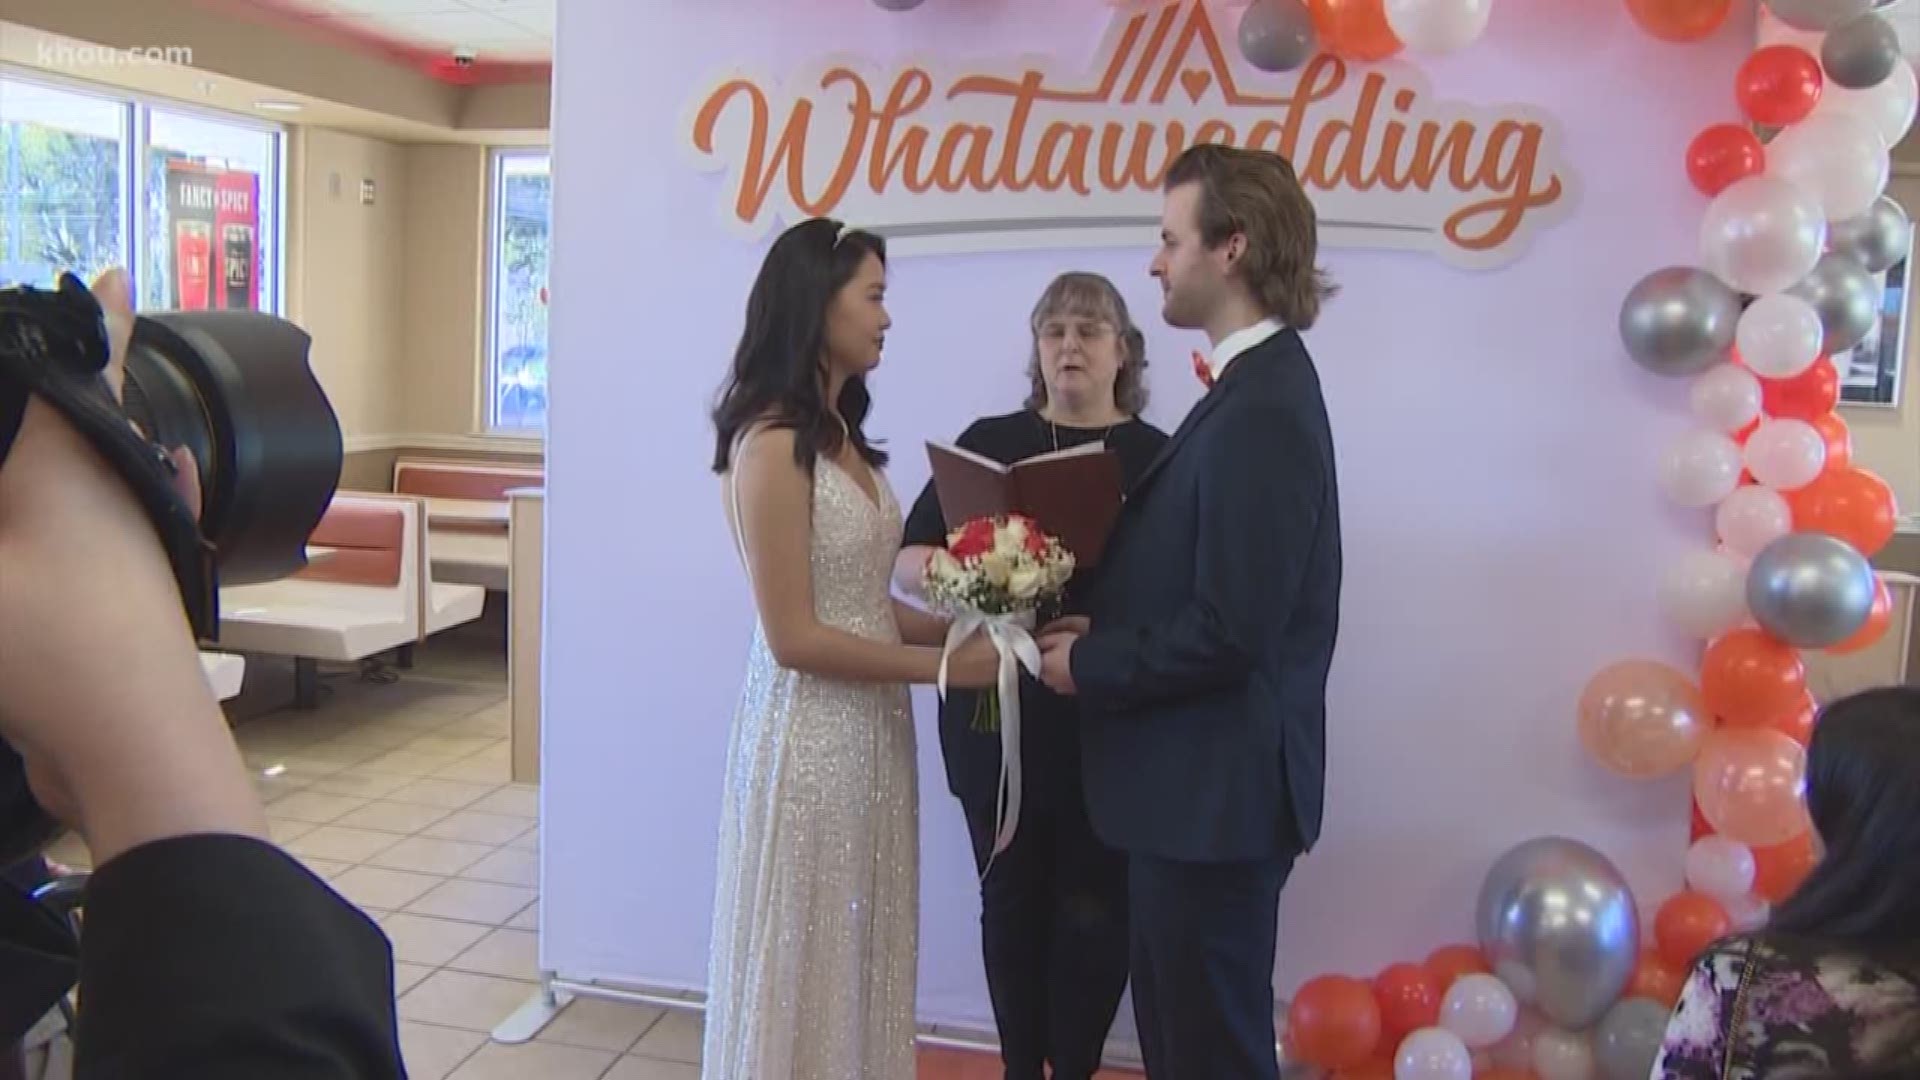 Six couples and contest winners were married at Whataburger across Texas, including one in Texas who tied the knot at a west Houston location on Valentine's Day.